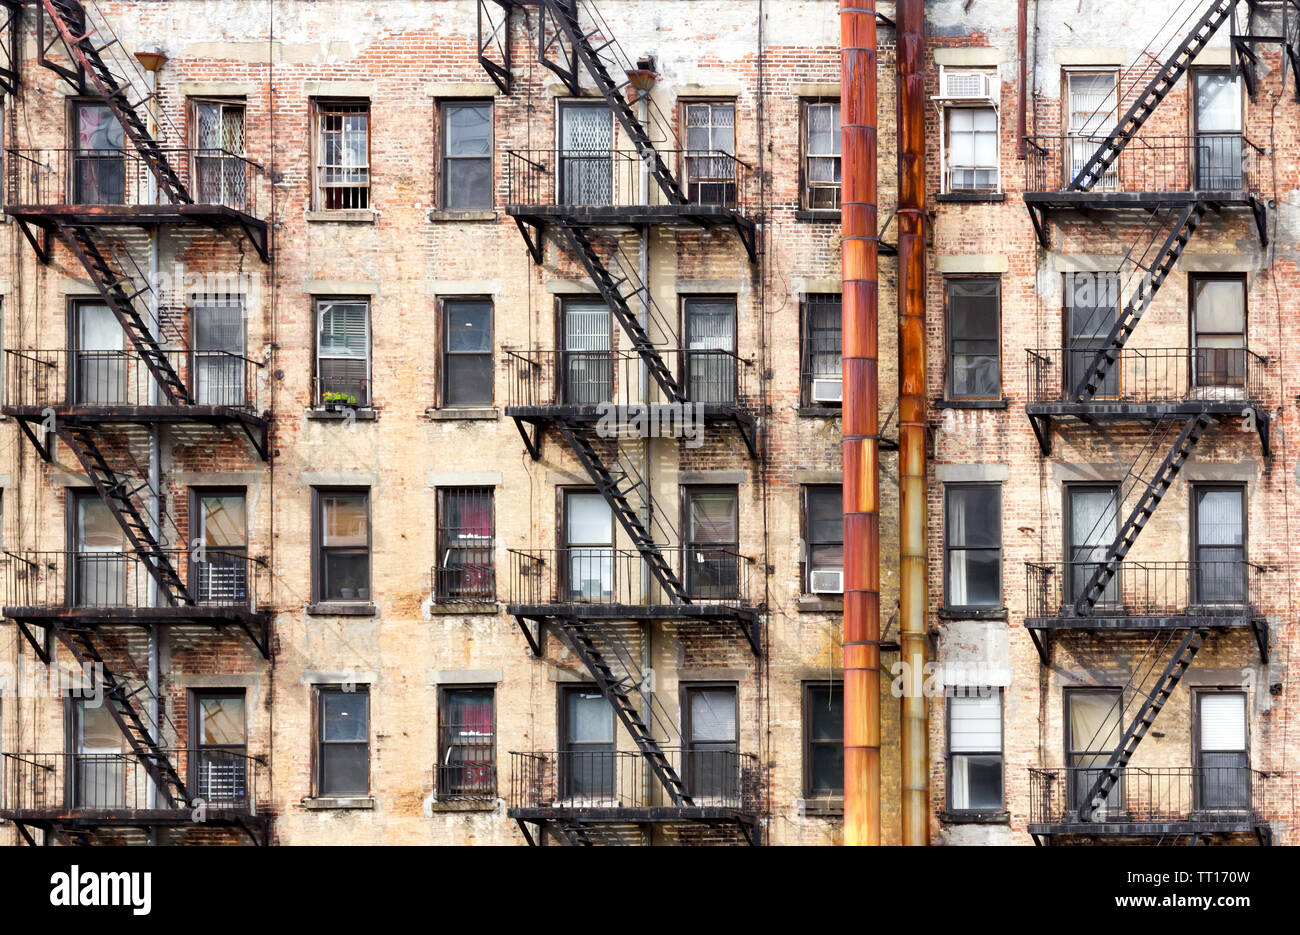 New York City old apartment building with rusted metal pipes Stock Photo